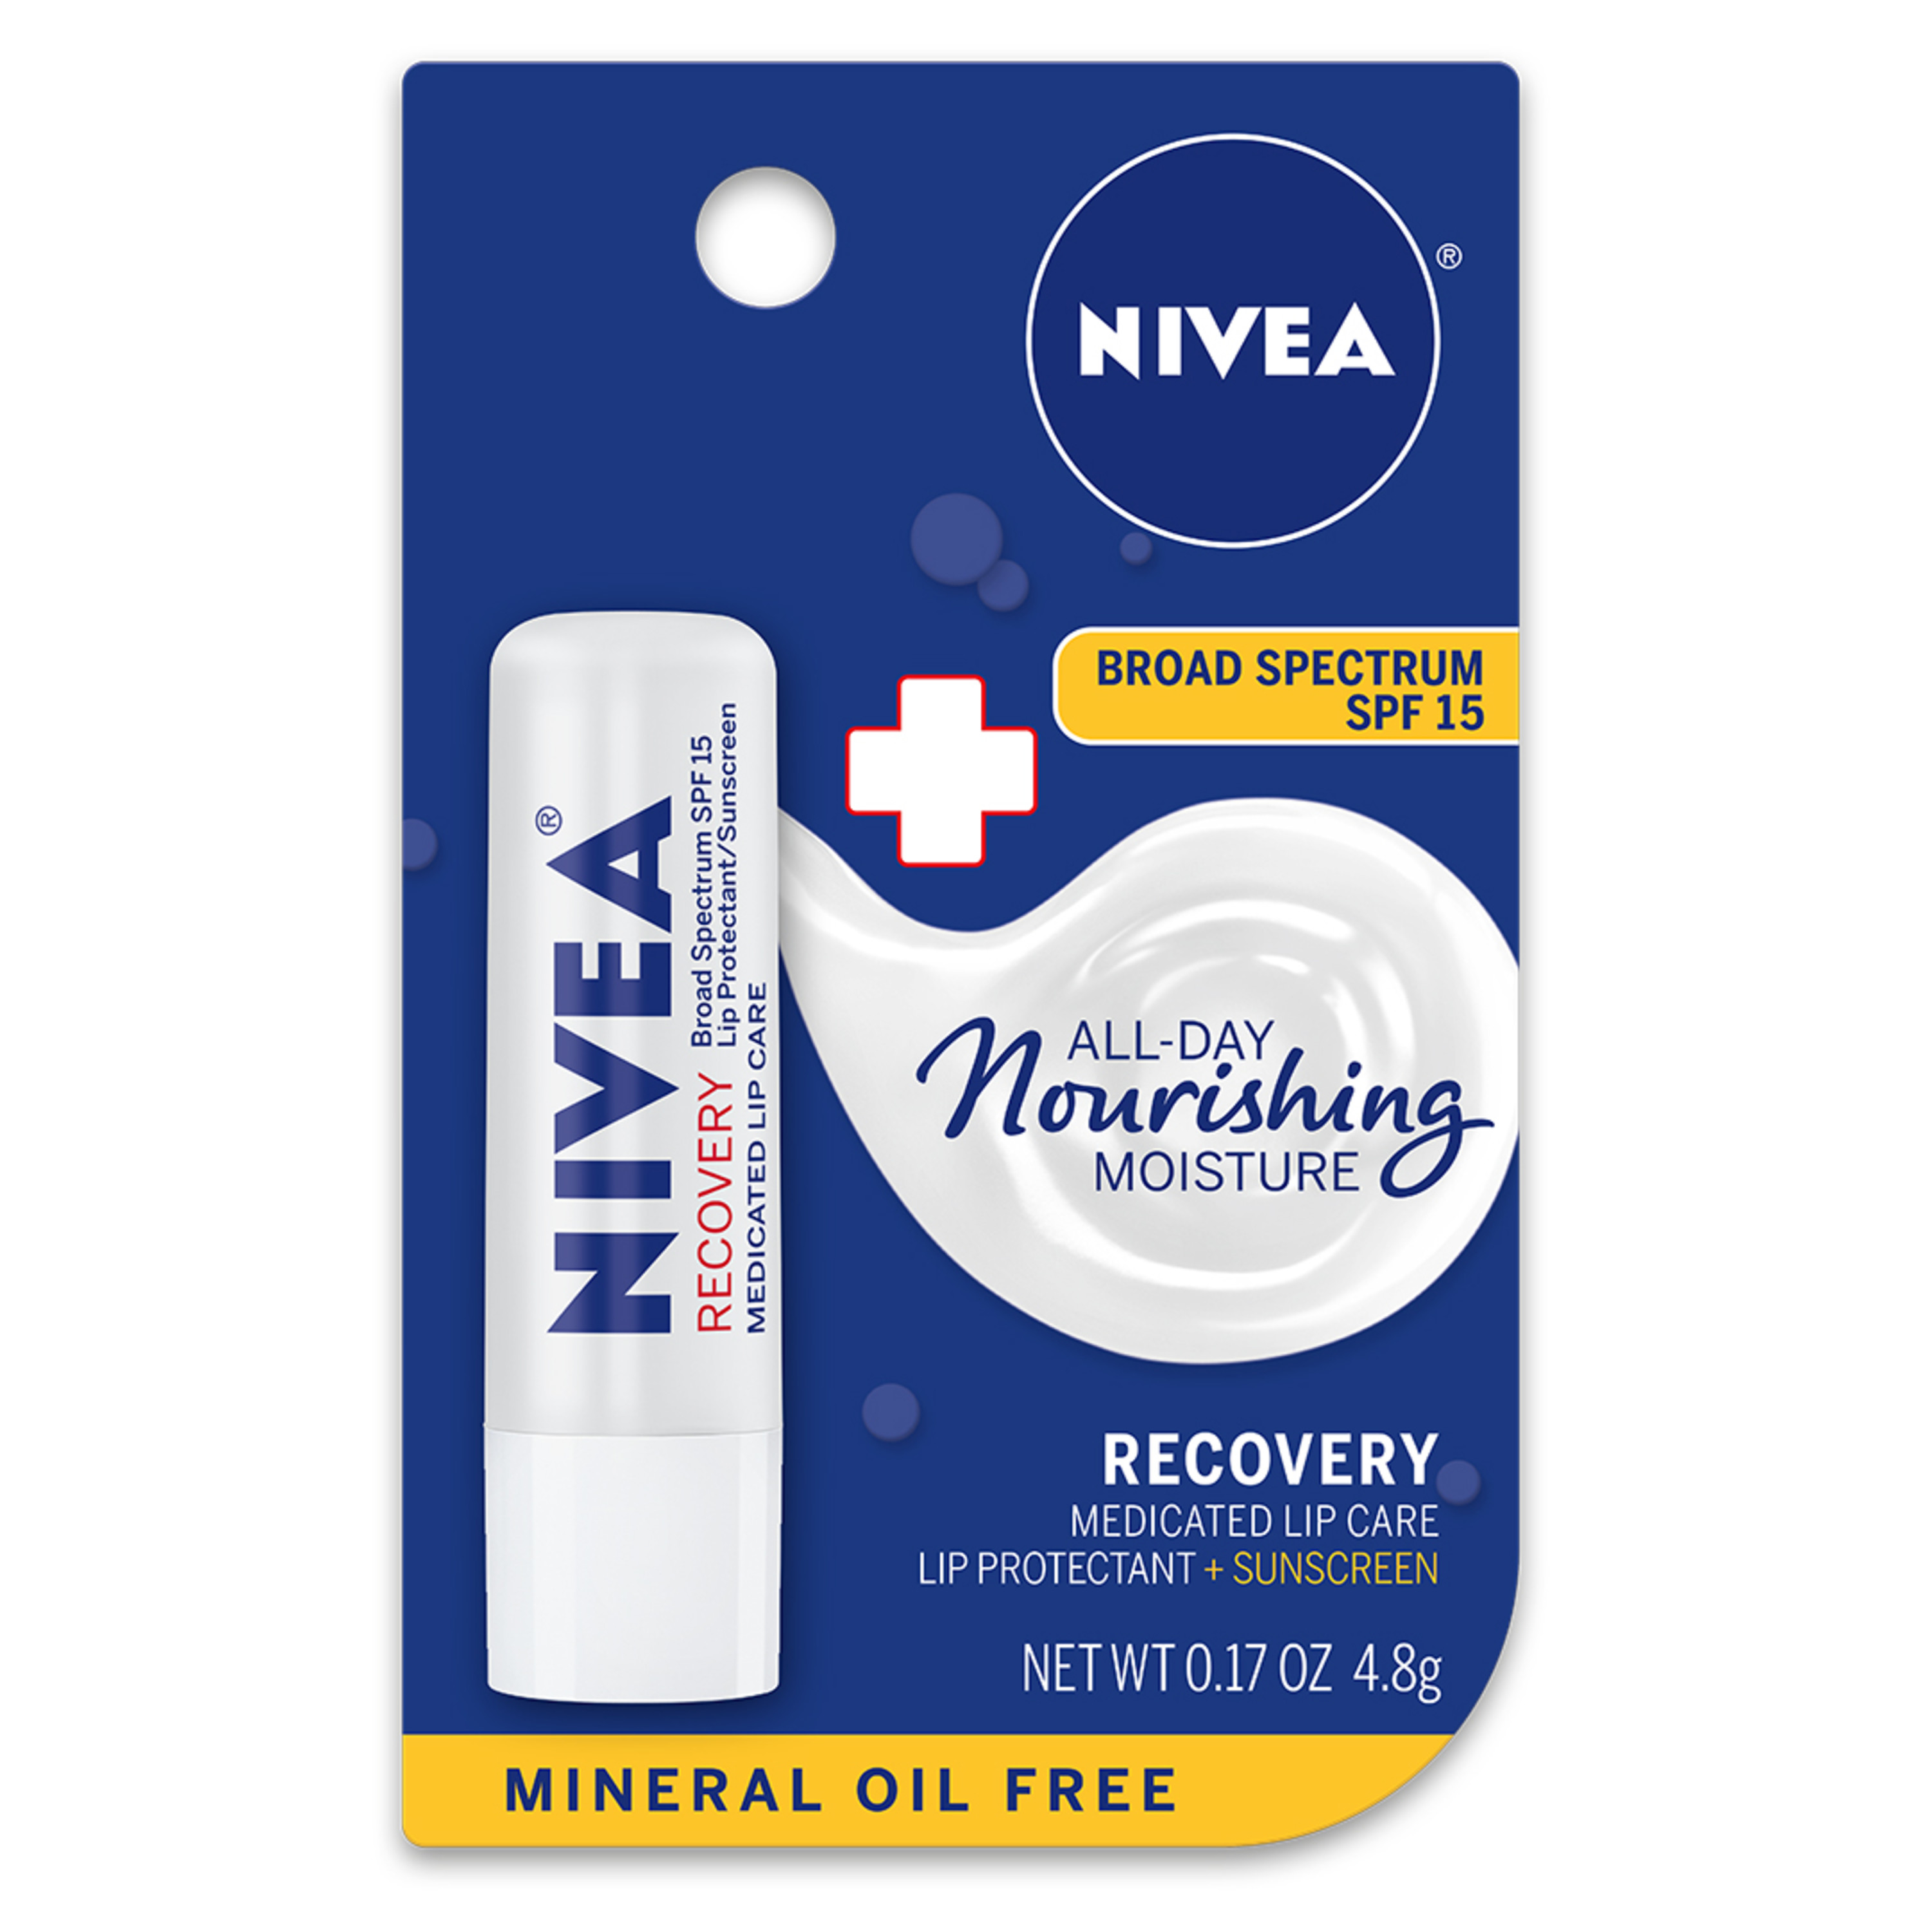 NIVEA Recovery Medicated Lip Care SPF 15 0.17 Carded Pack - image 1 of 9